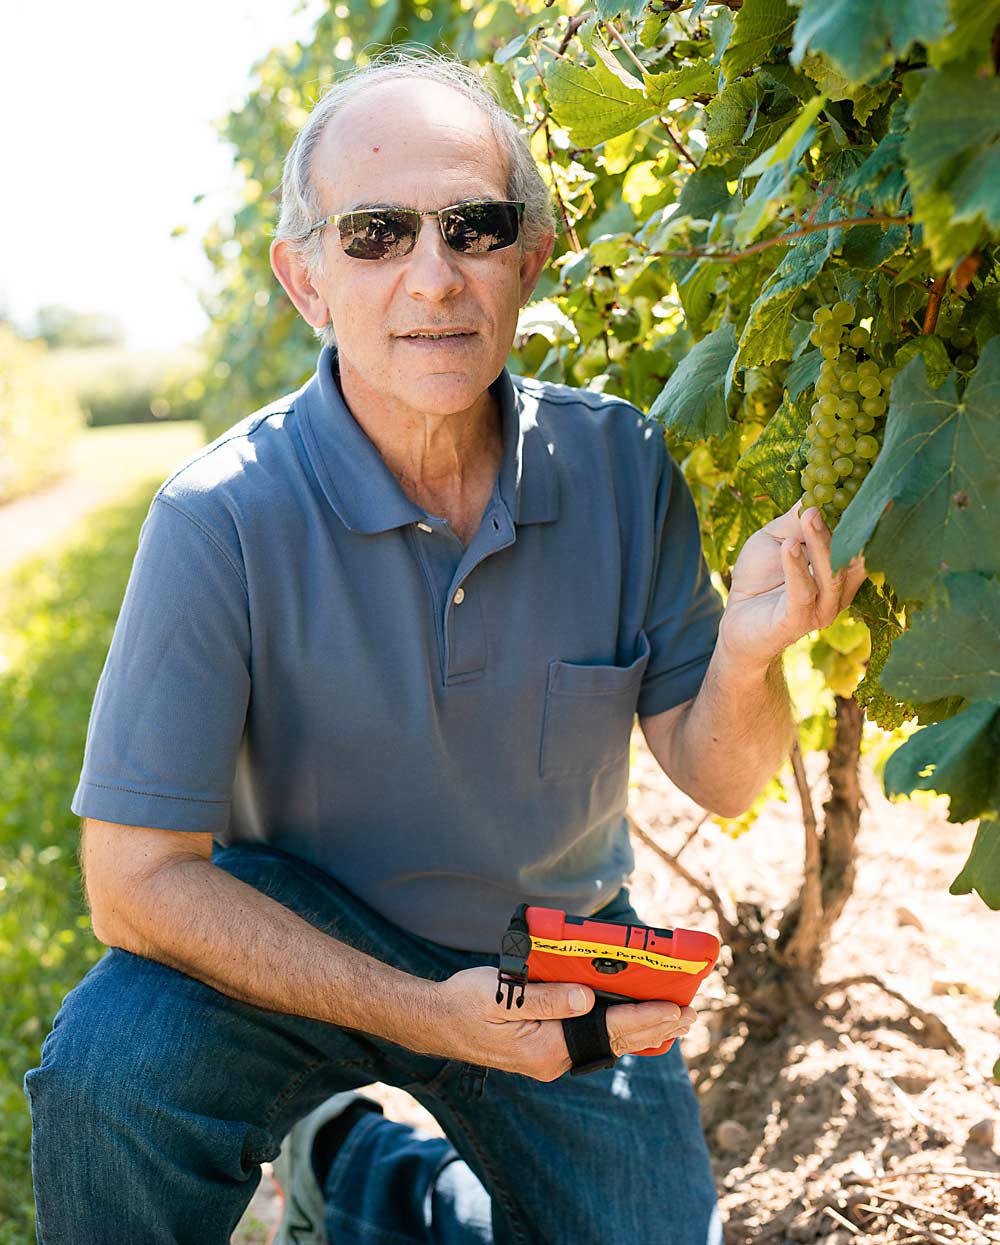 Bruce Reisch, leader of Cornell University’s Grapevine Breeding and Genetics Program and co-director of the VitisGen2 project, which is developing a new approach to refine and speed grape breeding programs. (Courtesy Cornell University)